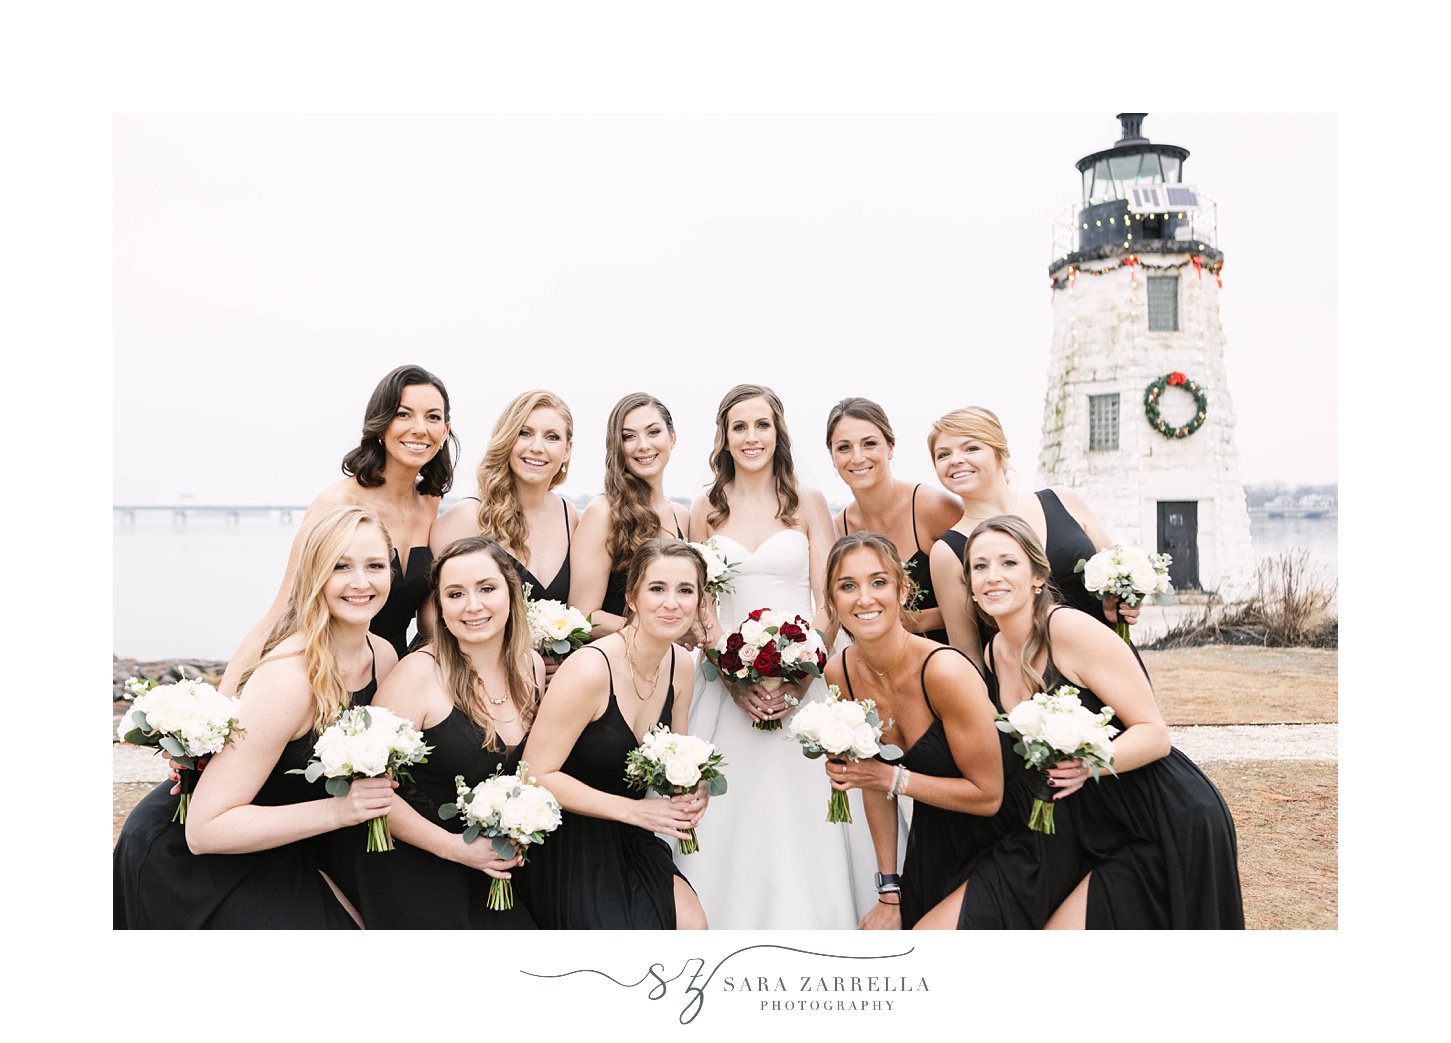 bridesmaids in black dresses hug around bride during photos by lighthouse